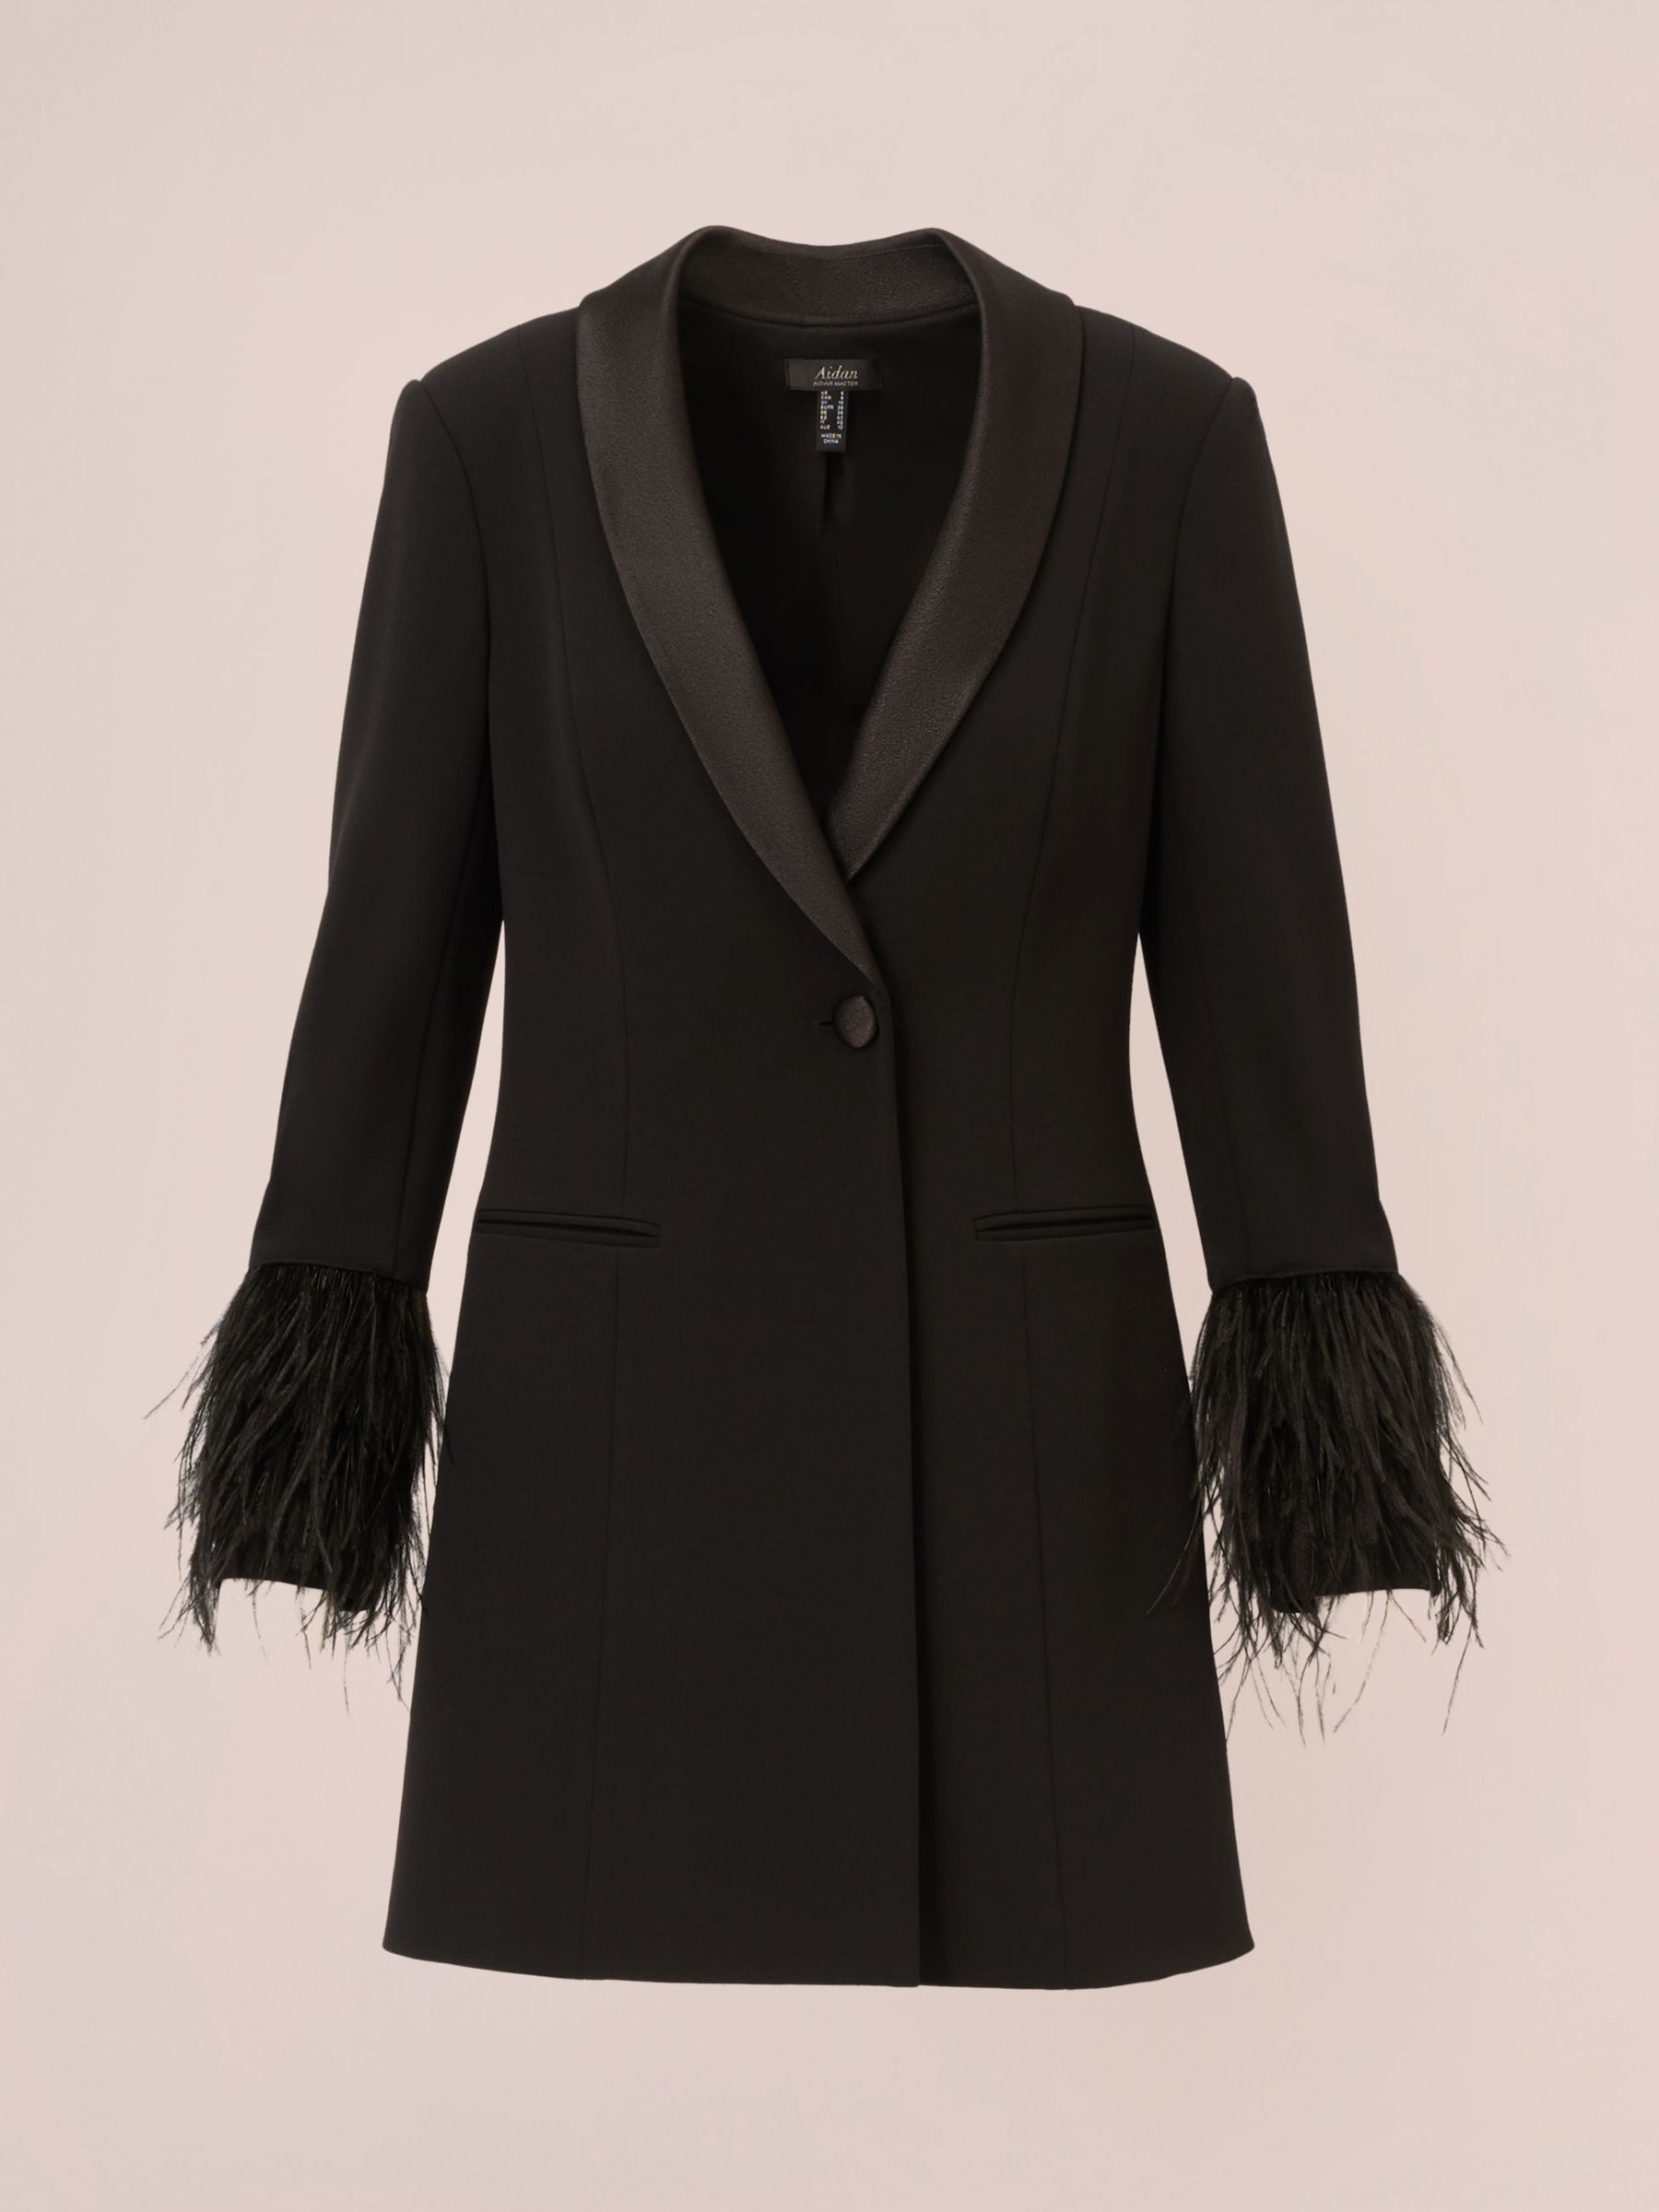 Buy Aidan by Adrianna Papell Crepe Feather Cuff Blazer Dress, Black Online at johnlewis.com